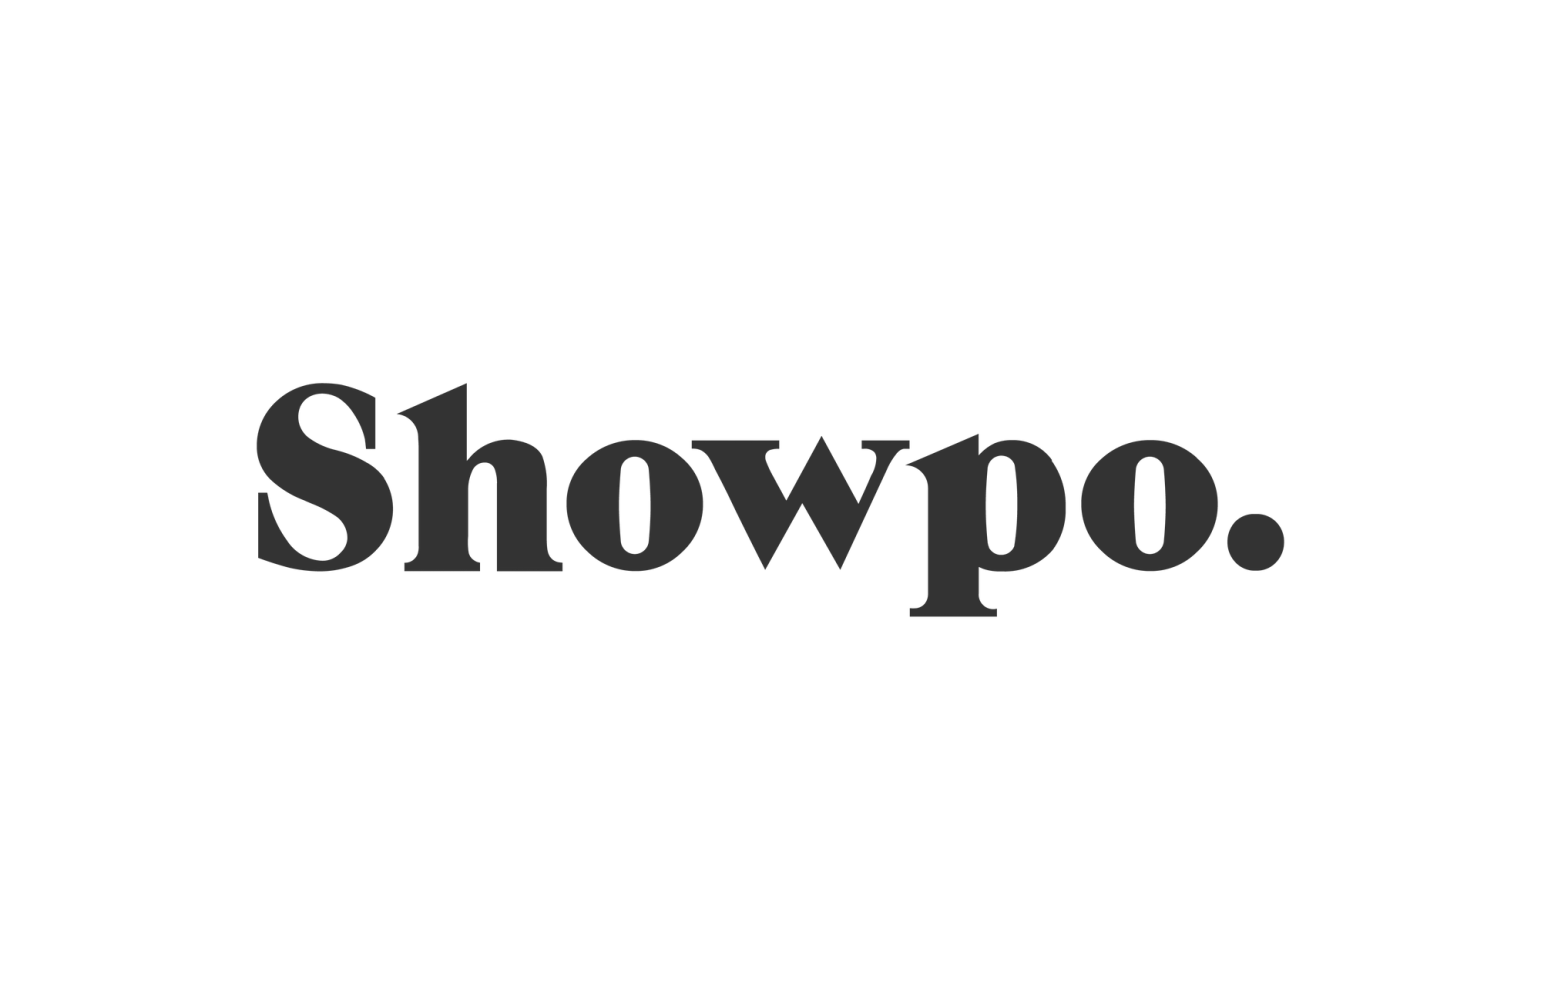 ShowPo has instant returns management with easy shipping